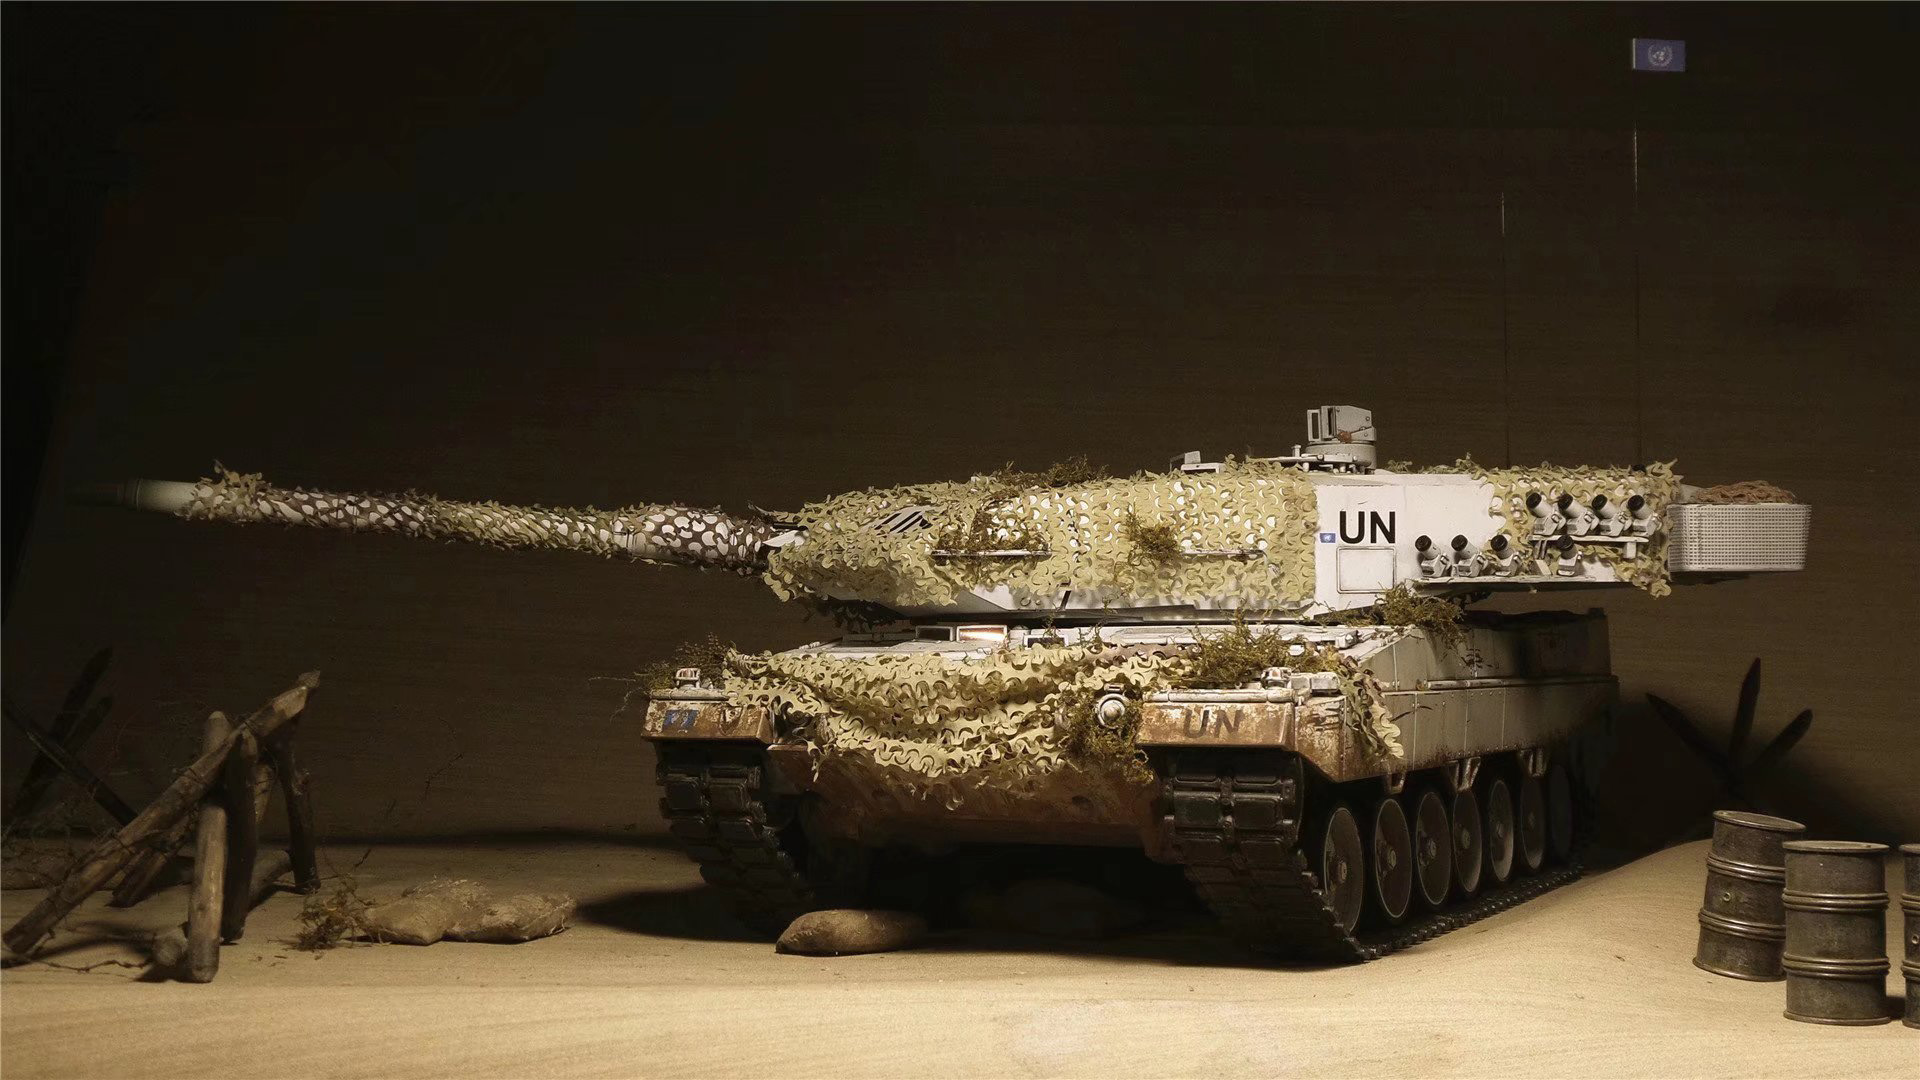 99% like the real Leopard 2A6 tank, Professional Full Metal Leopard 2 RC Tank Scale model, With Tank Gun Stabilizer / Gun Stabilization System & RC Tank Raise Their Gun Barrels After Firing, Custom Paint UN White Color Coating